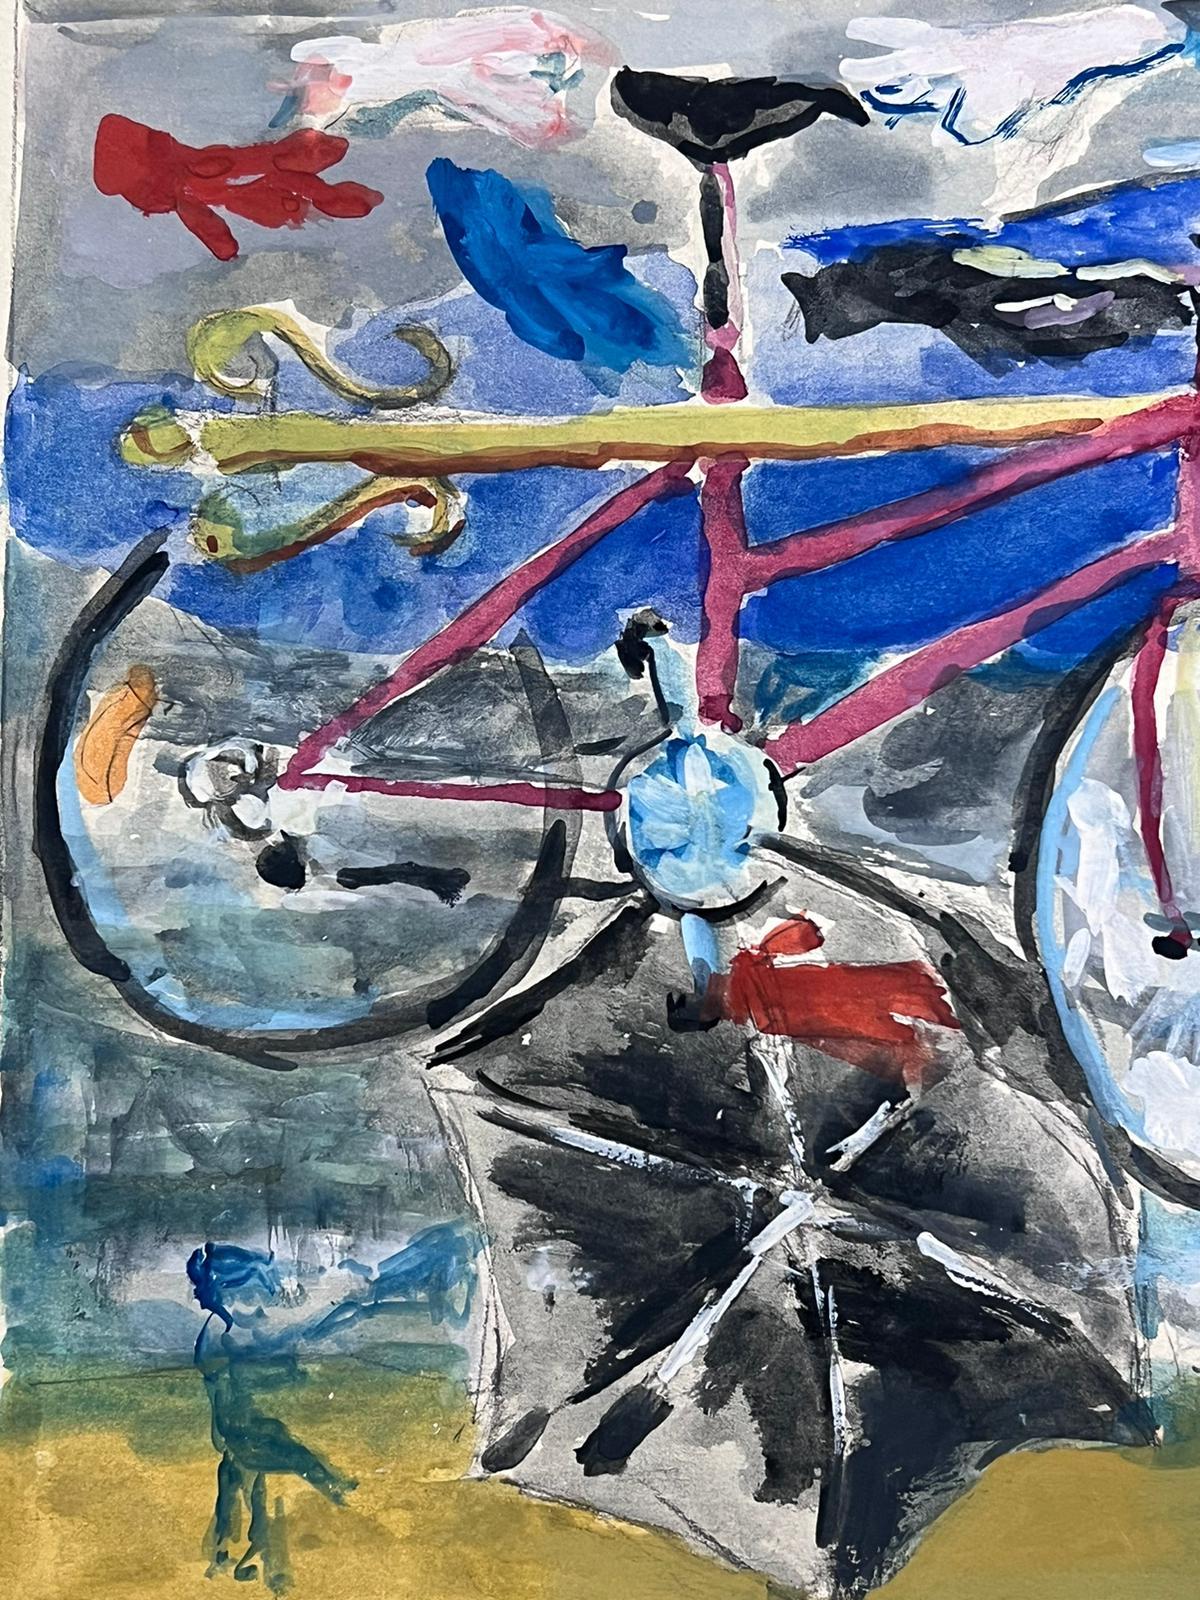 French 20th Century Surrealist Modernist Painting Bicycle & Umbrella For Sale 1